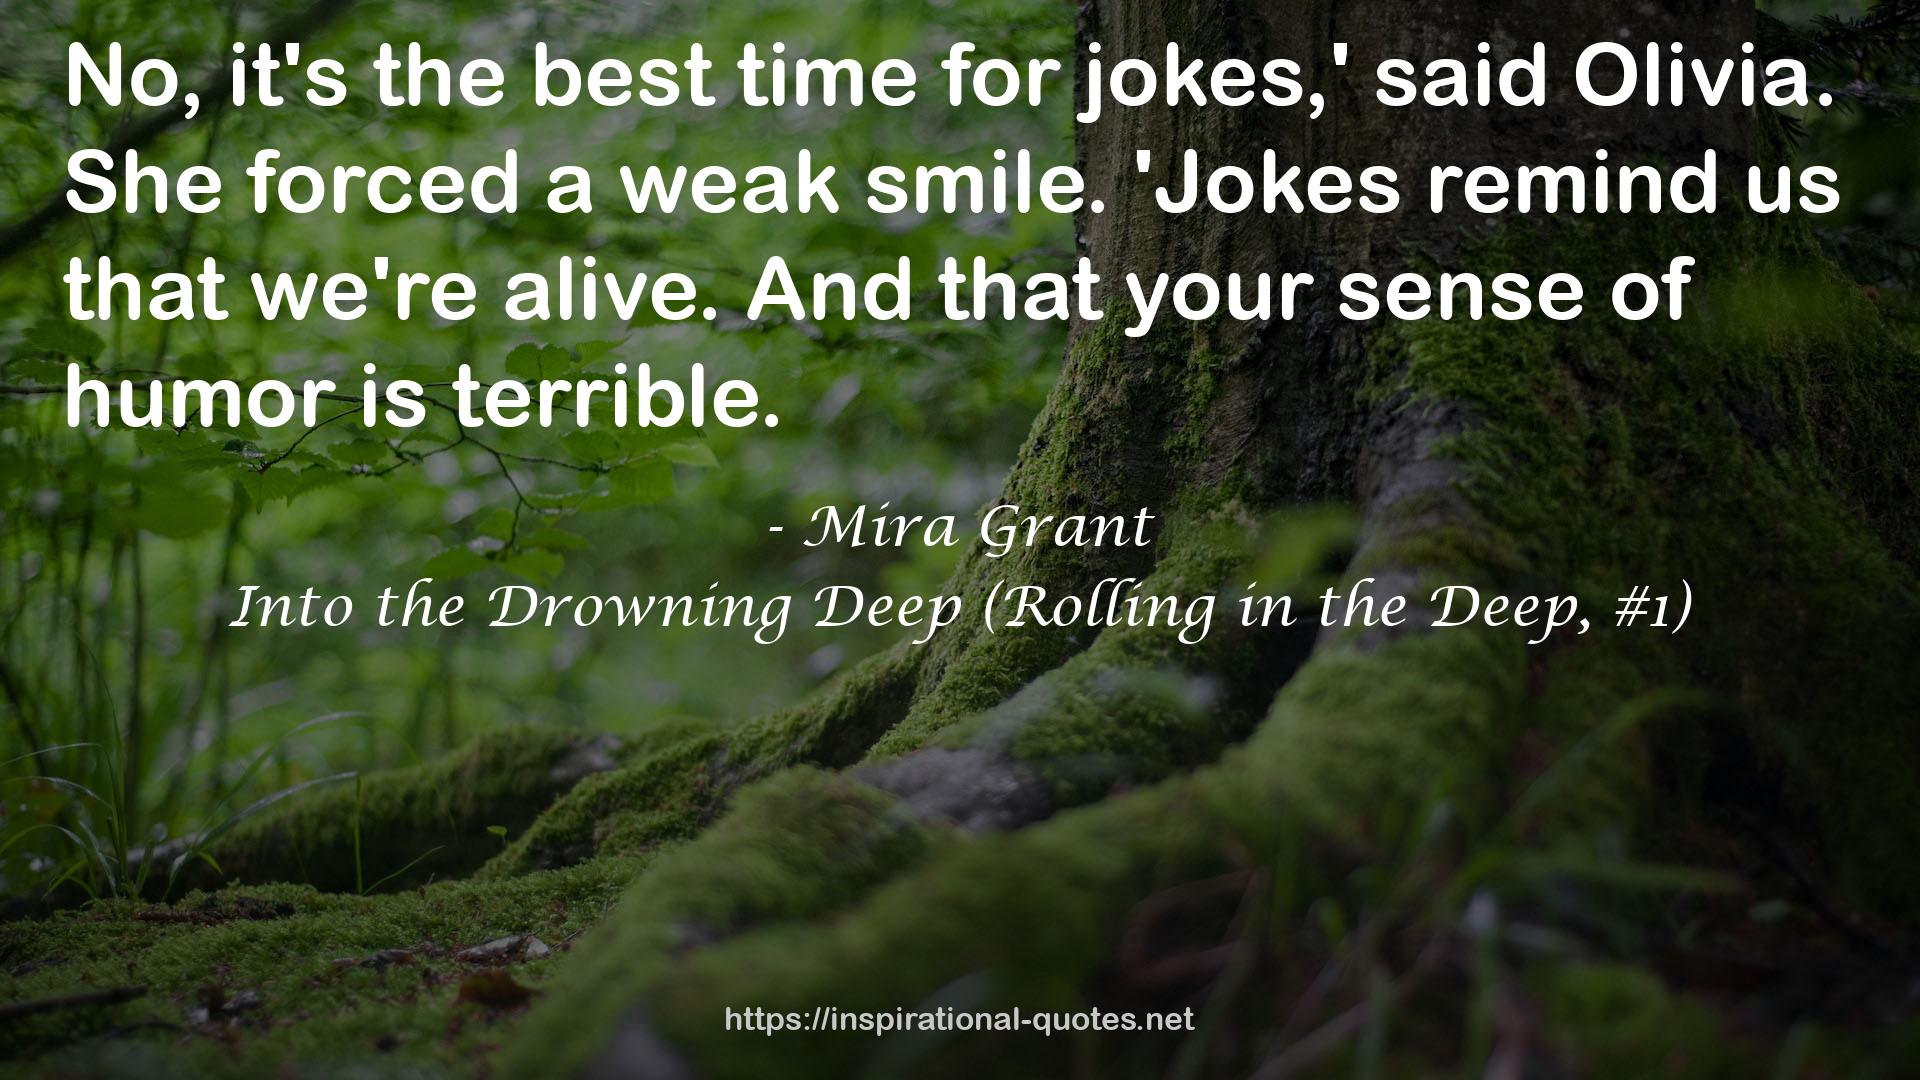 Into the Drowning Deep (Rolling in the Deep, #1) QUOTES